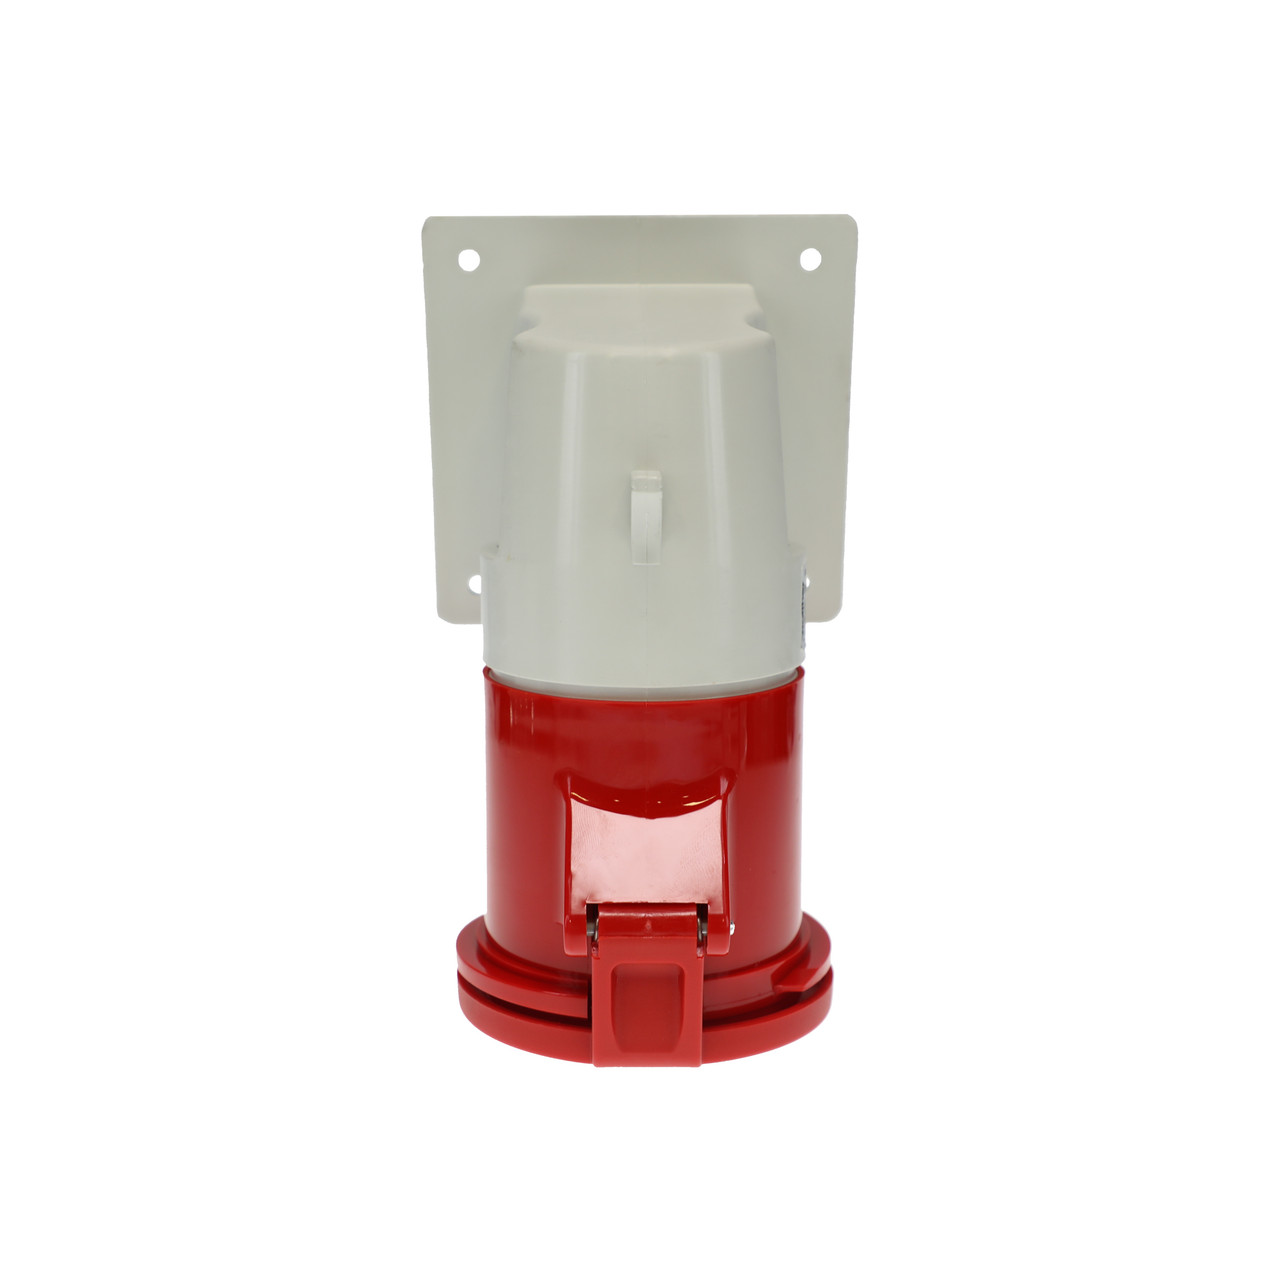 Walther Electric 564 Pin and Sleeve Receptacles 63A 5 Wire 400 VAC  6Hr  IP44 Splashproof - Industrial Grade IEC (Red)